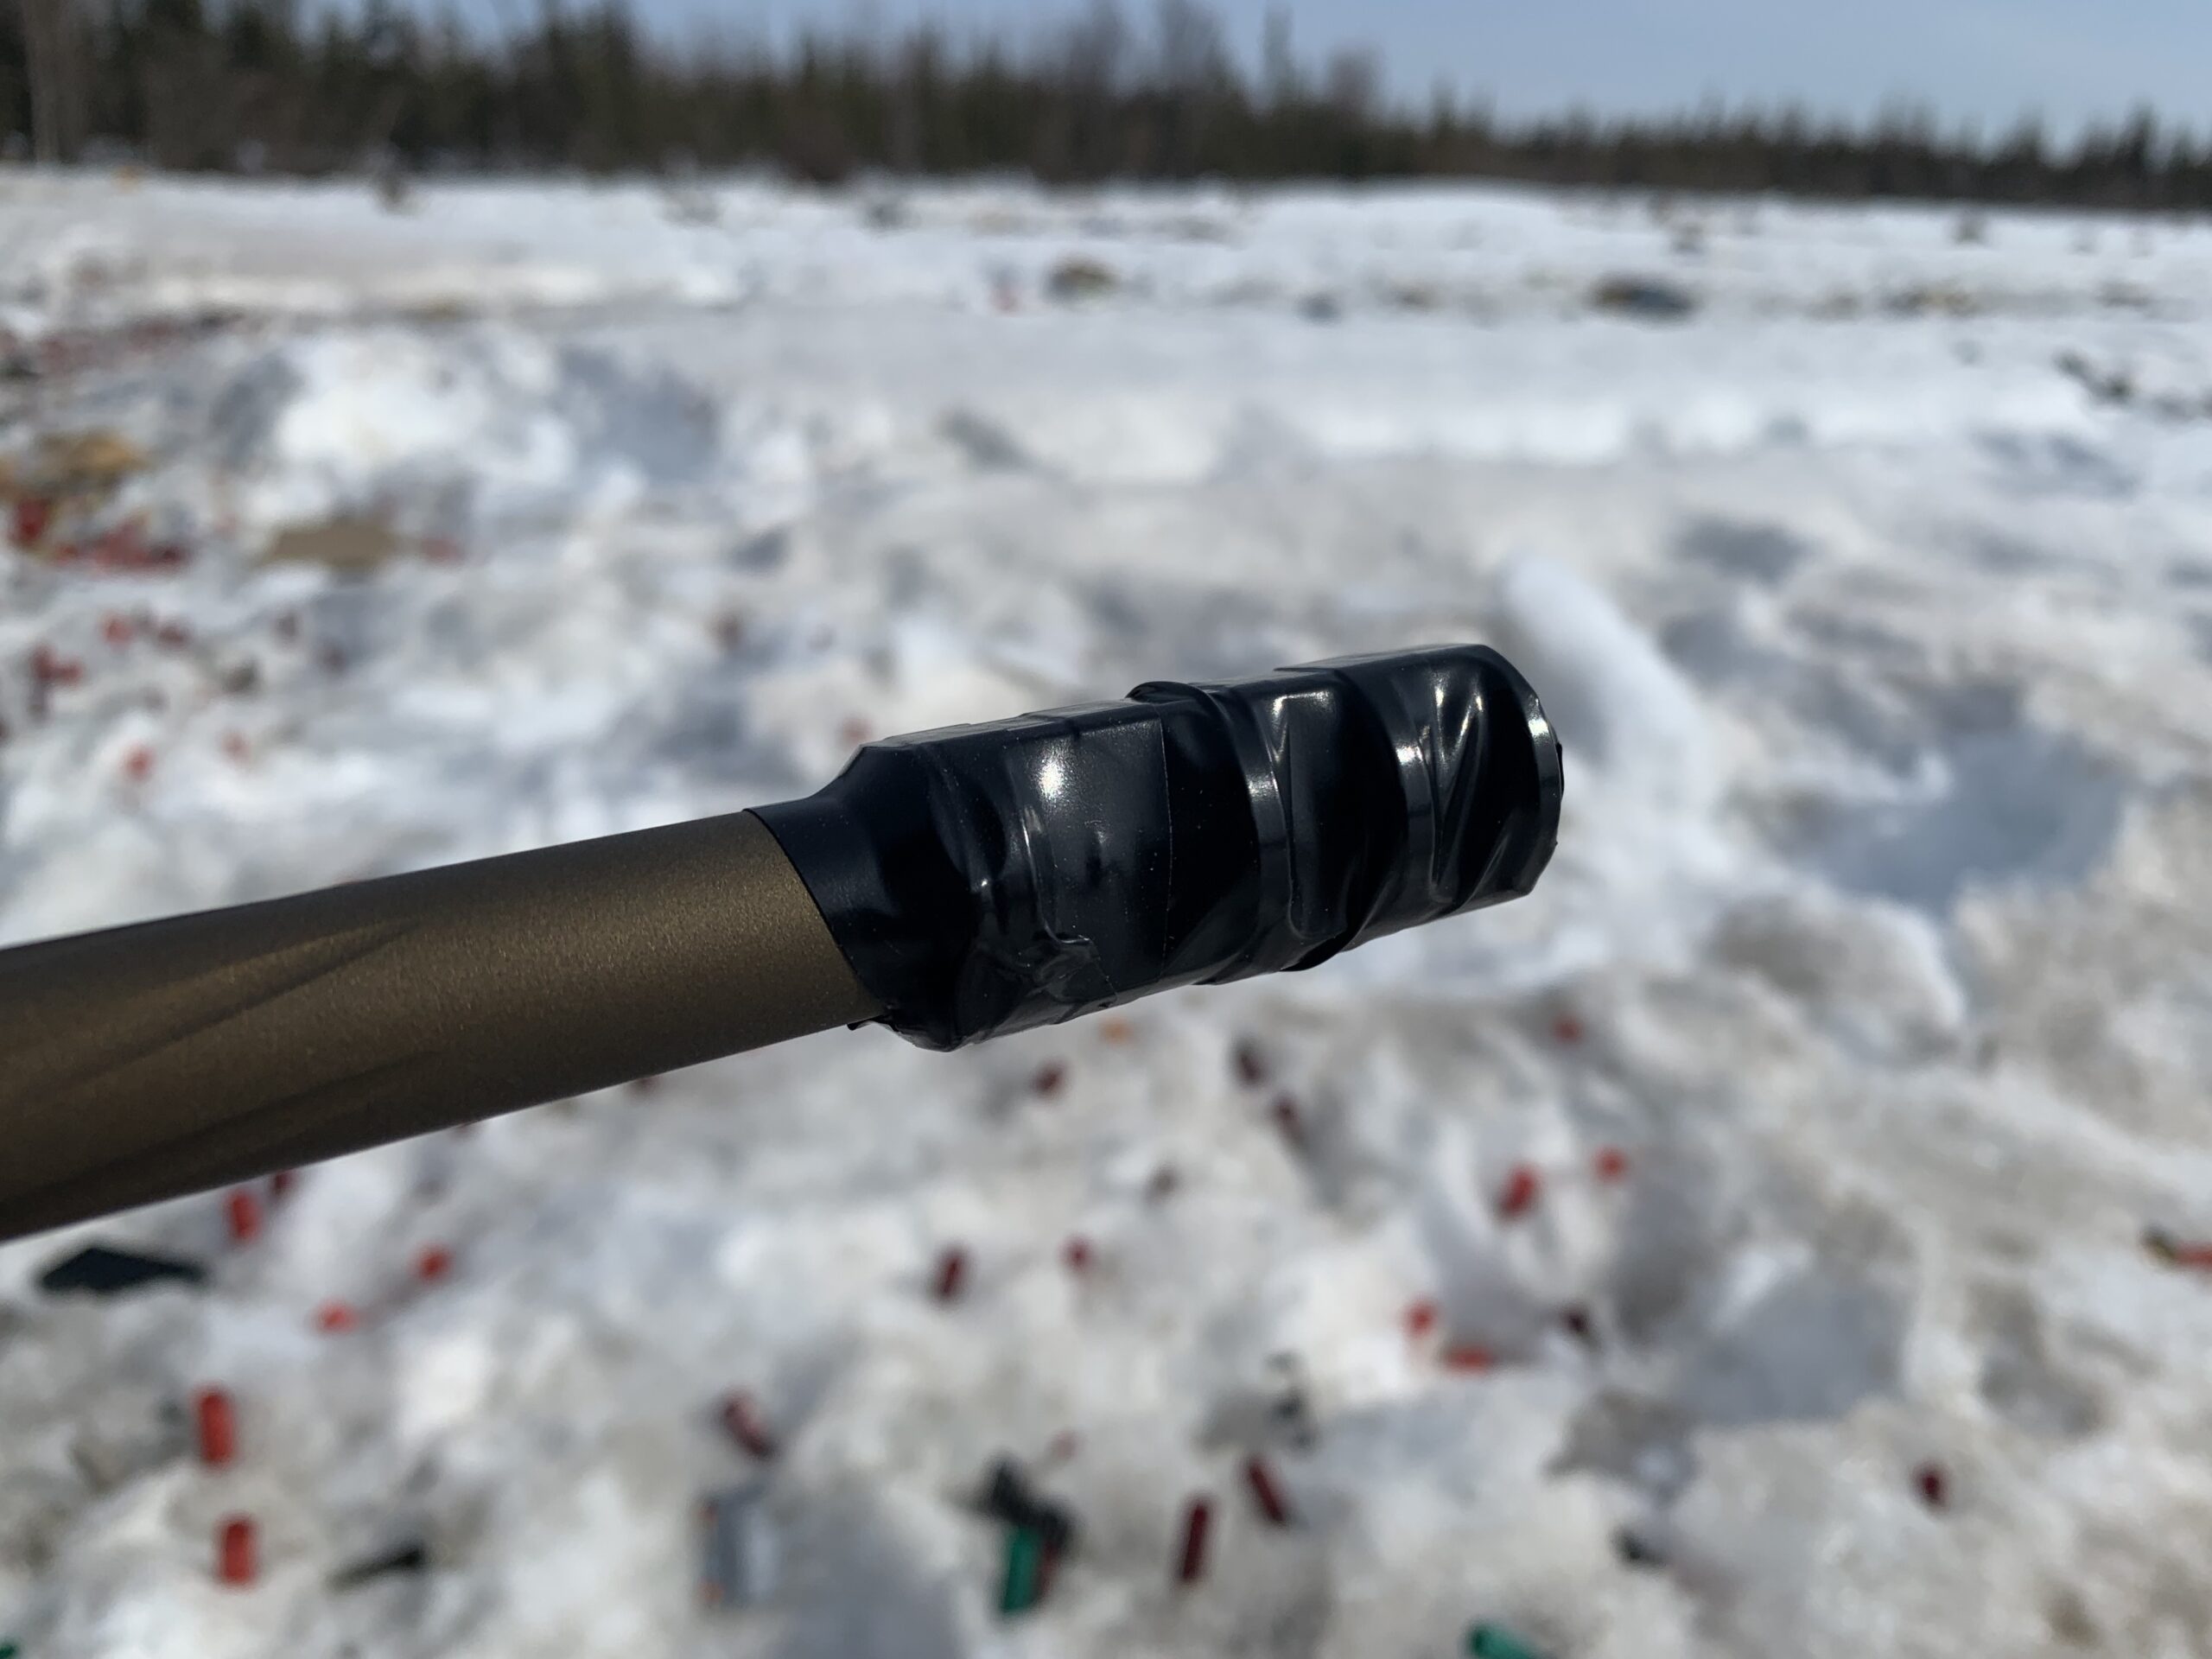 A muzzle brake sealed with electrical tape